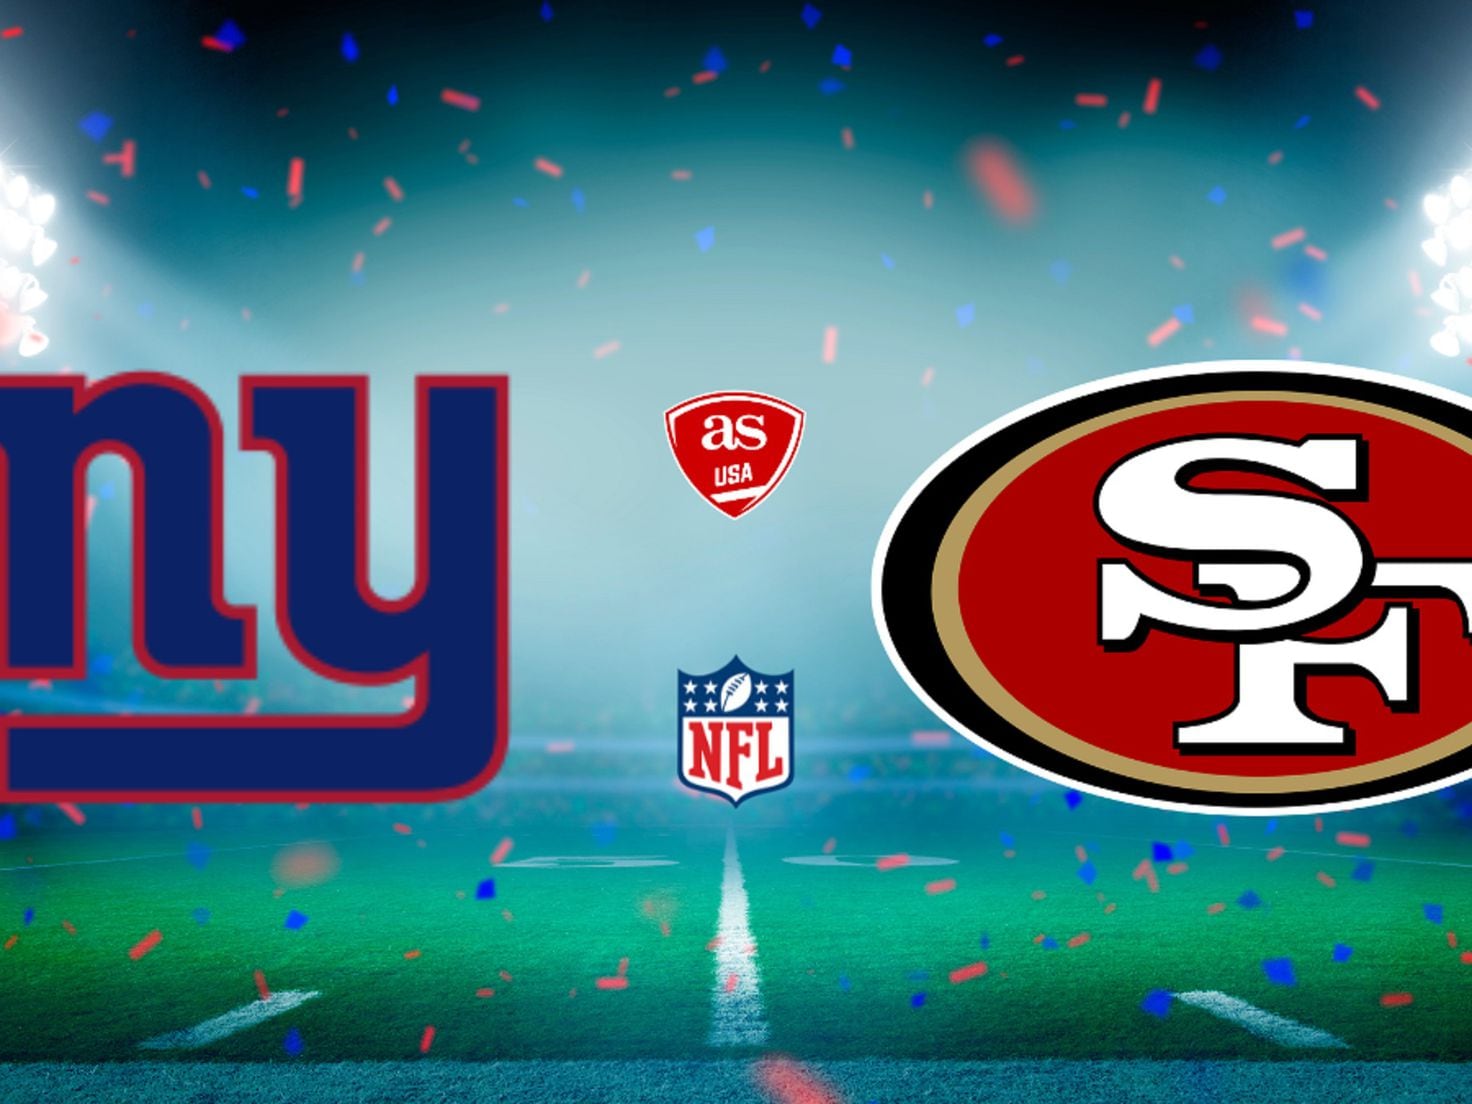 New York Giants vs San Francisco 49ers: times, how to watch on TV